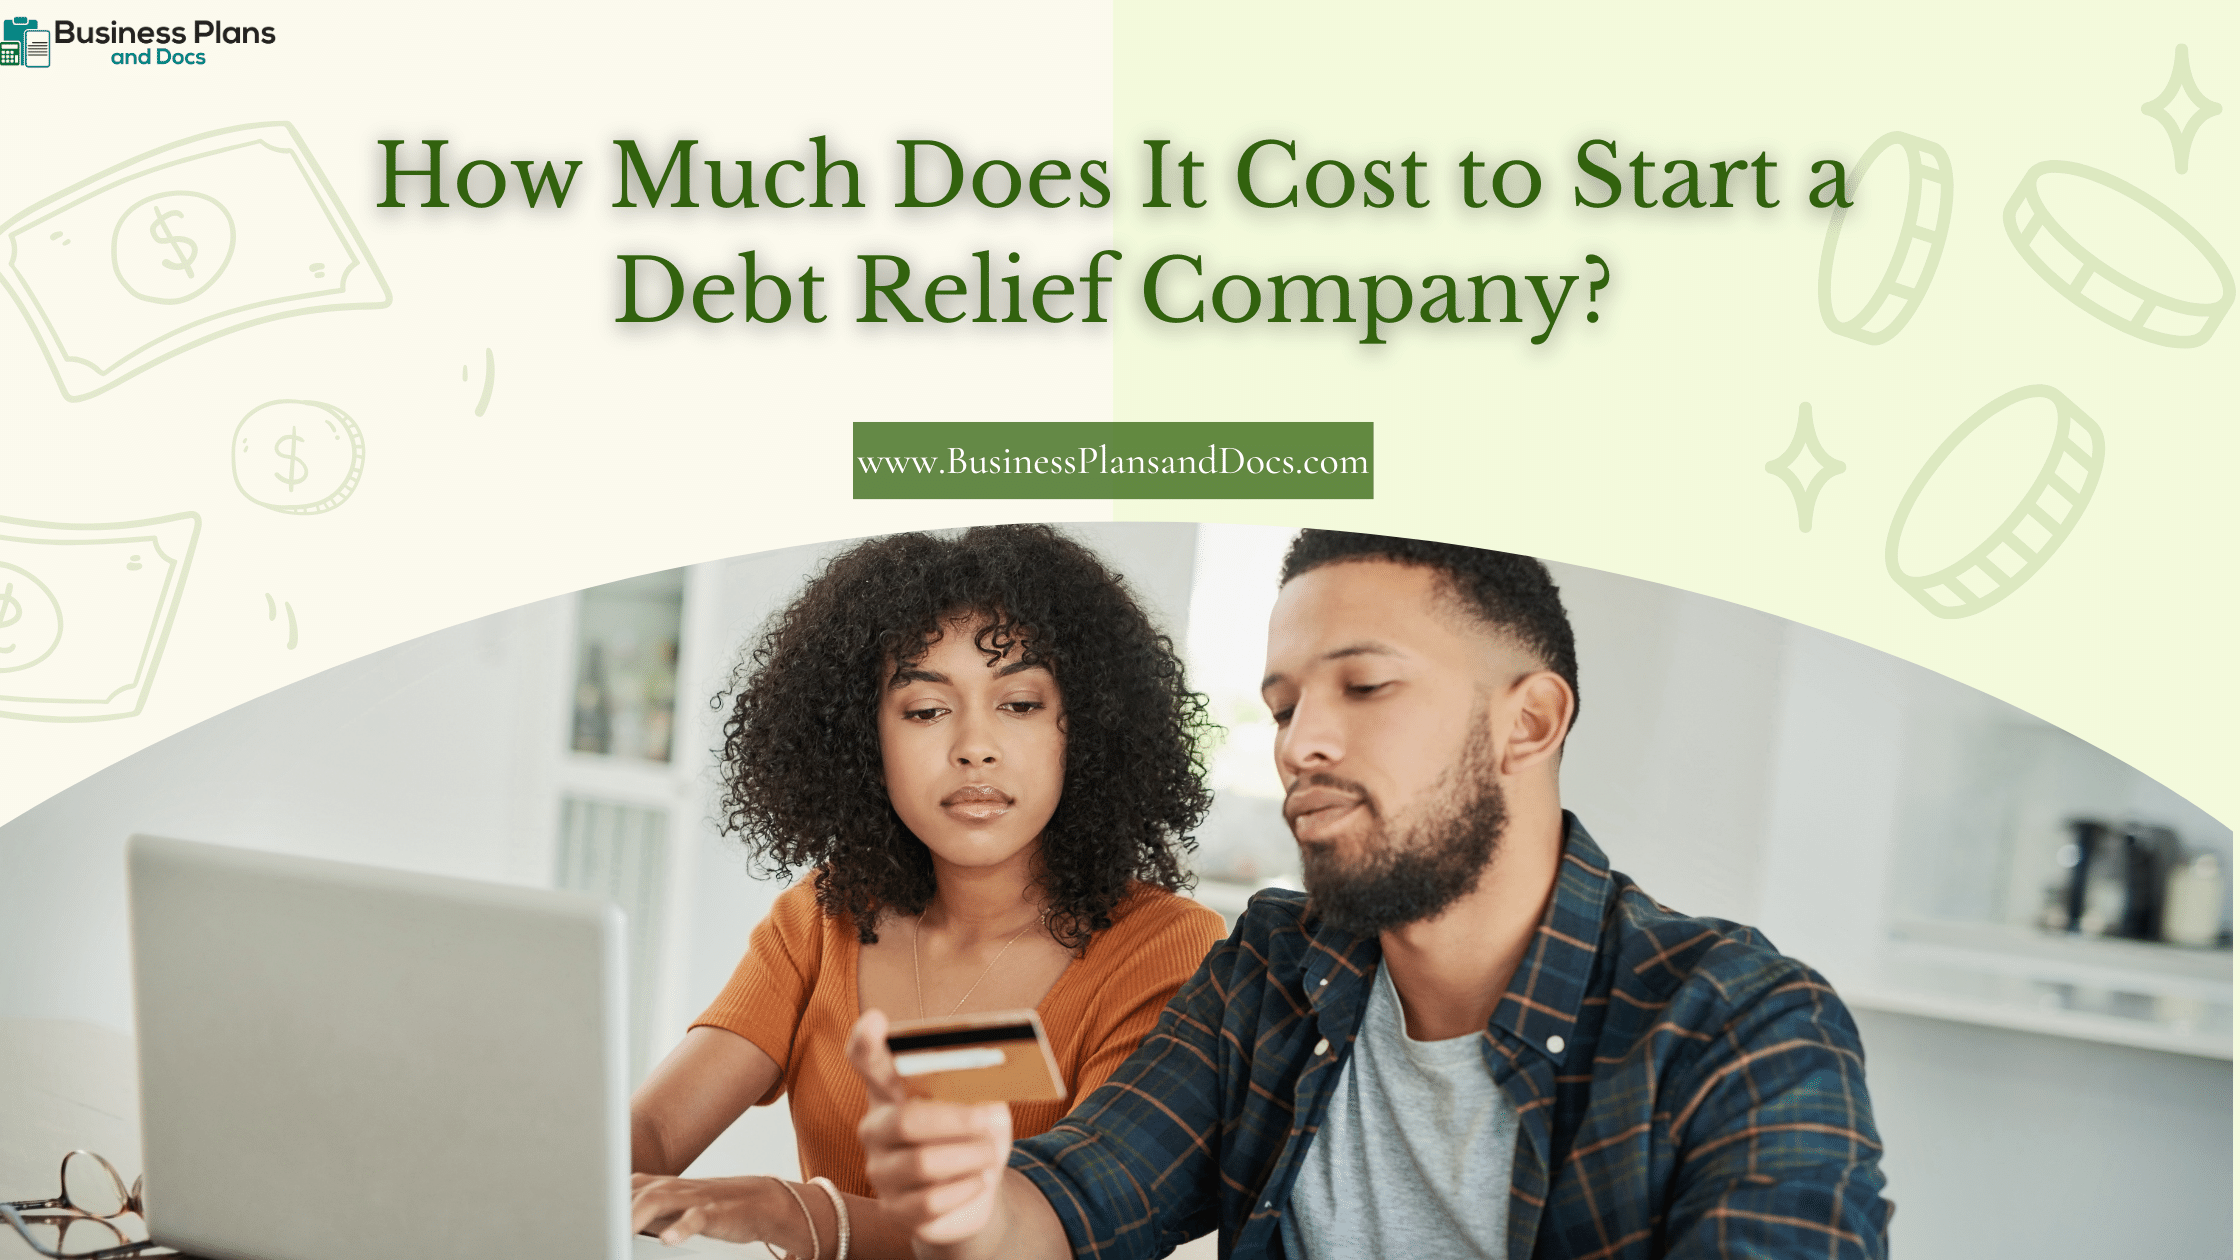 How Much Does It Cost to Start a Debt Relief Company?